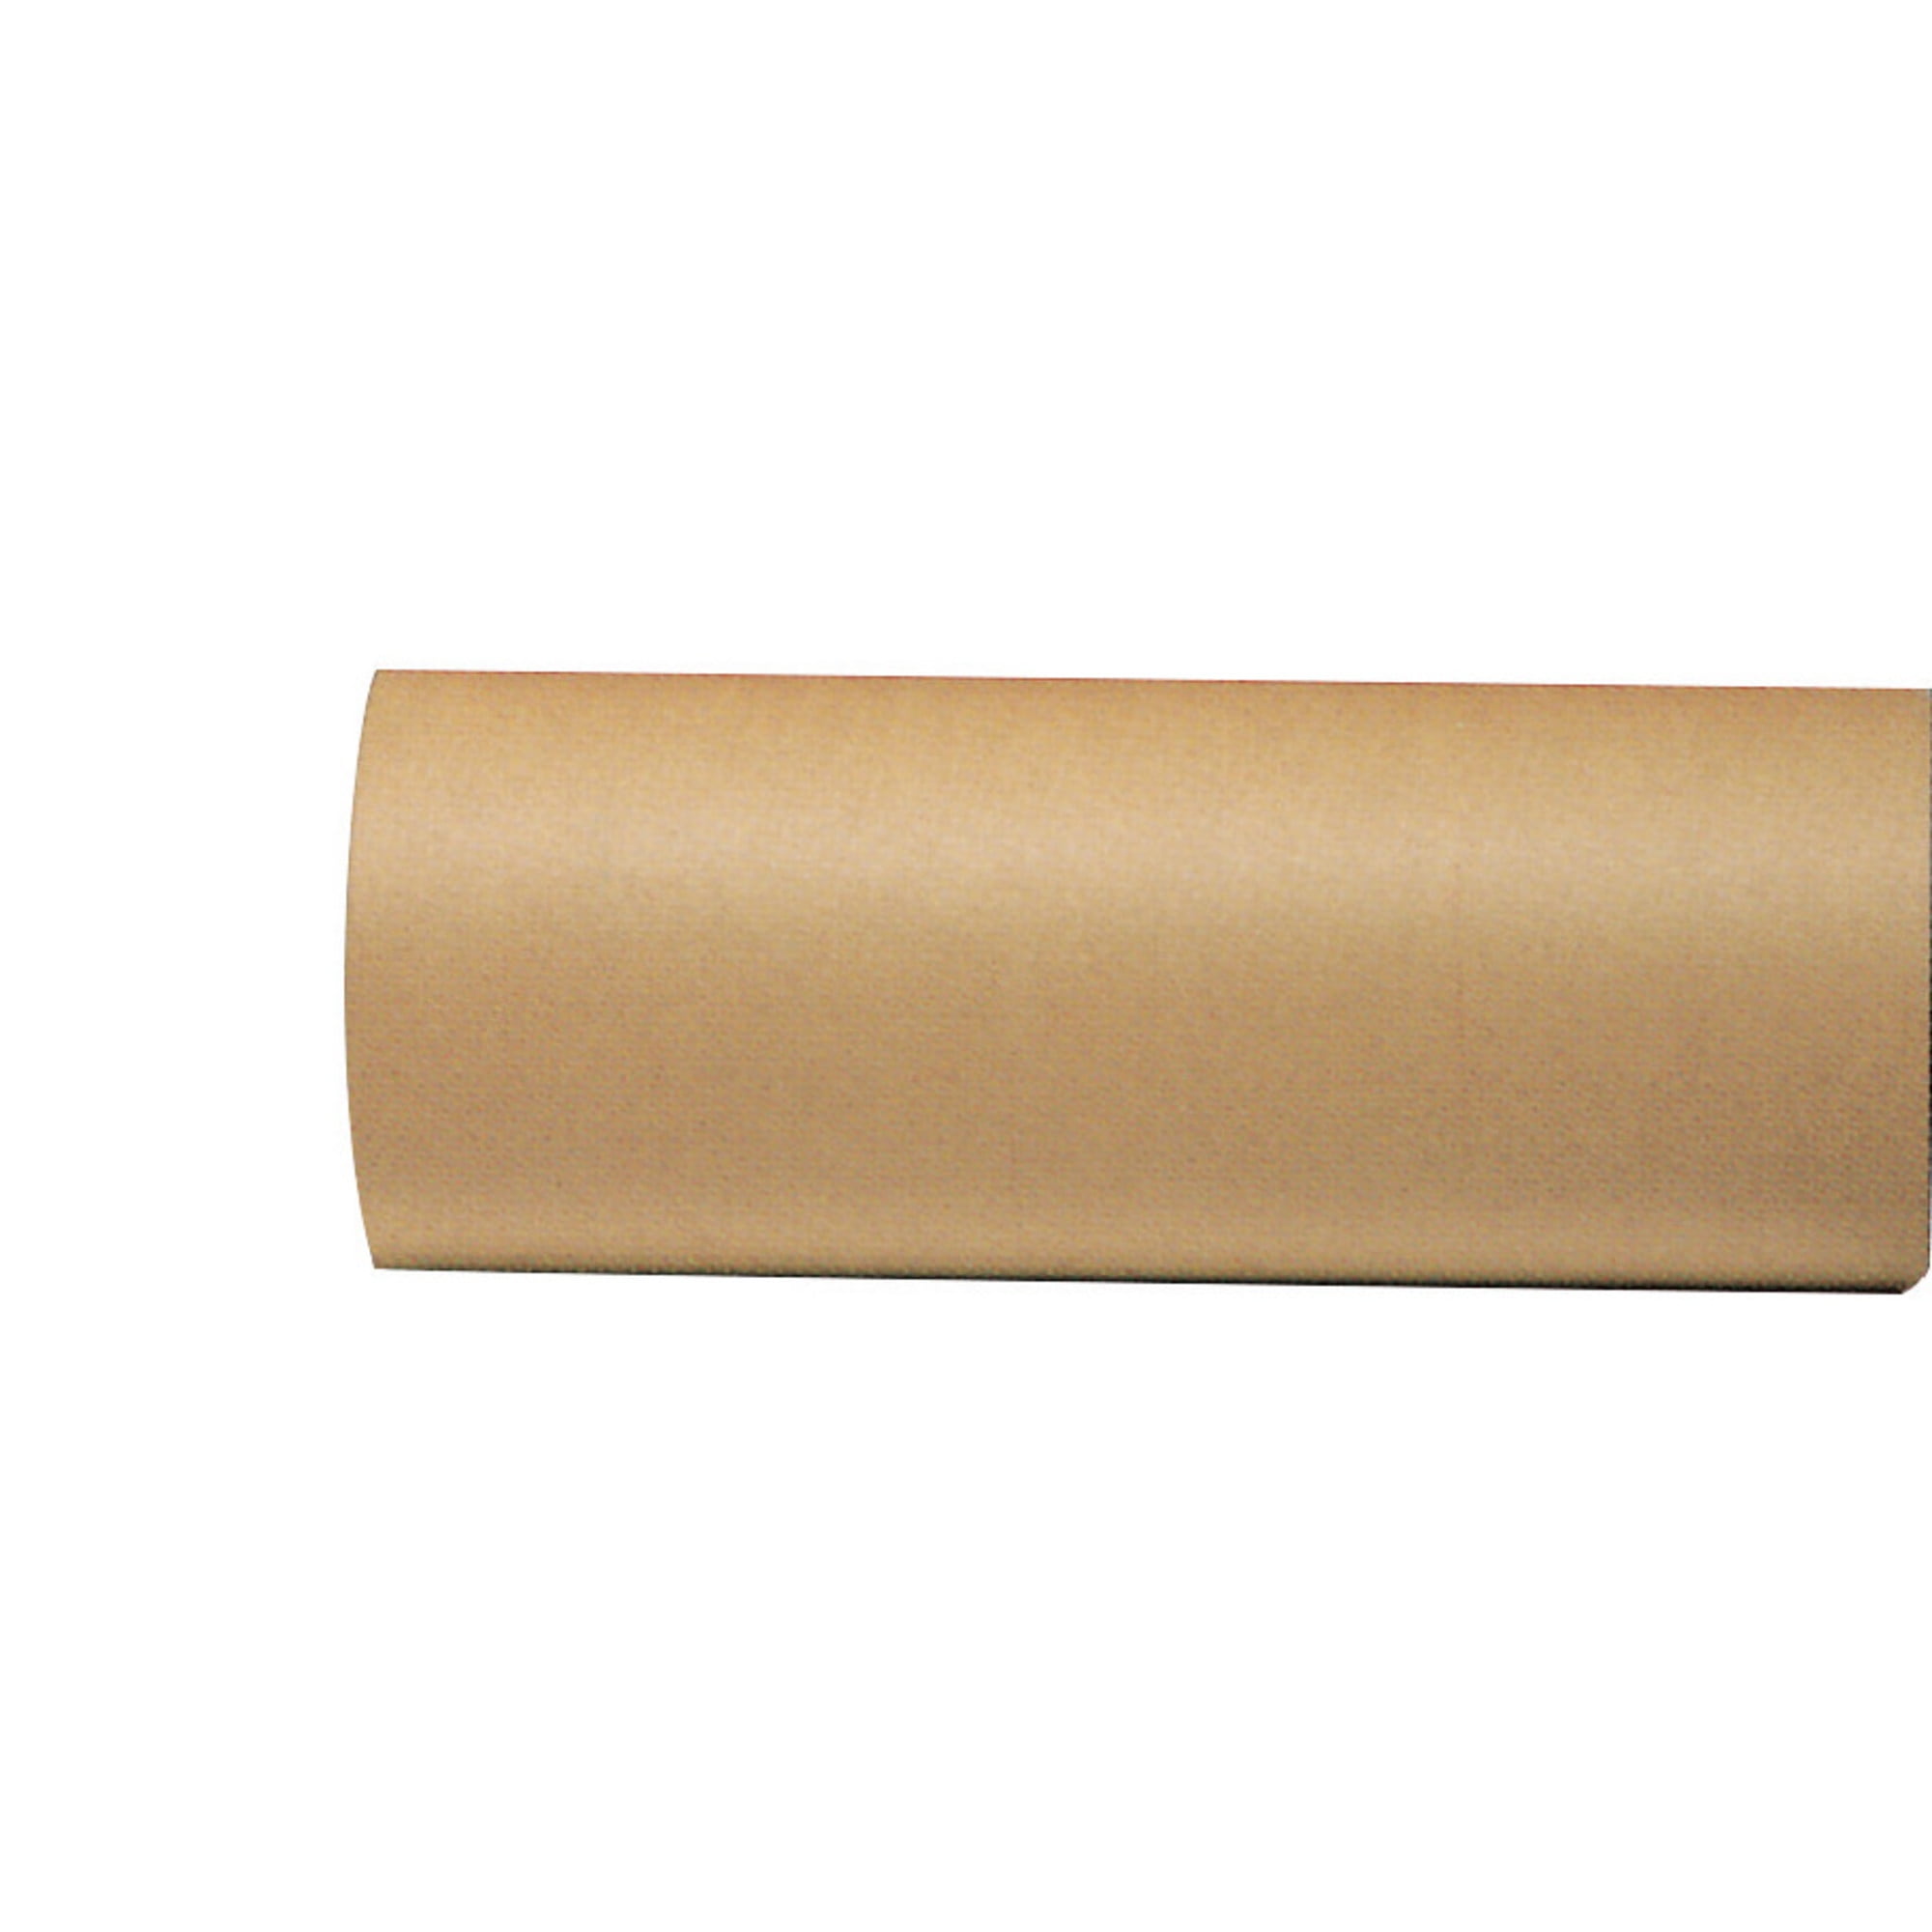 Construction Paper Products, Paper Rolls and More from School Specialty